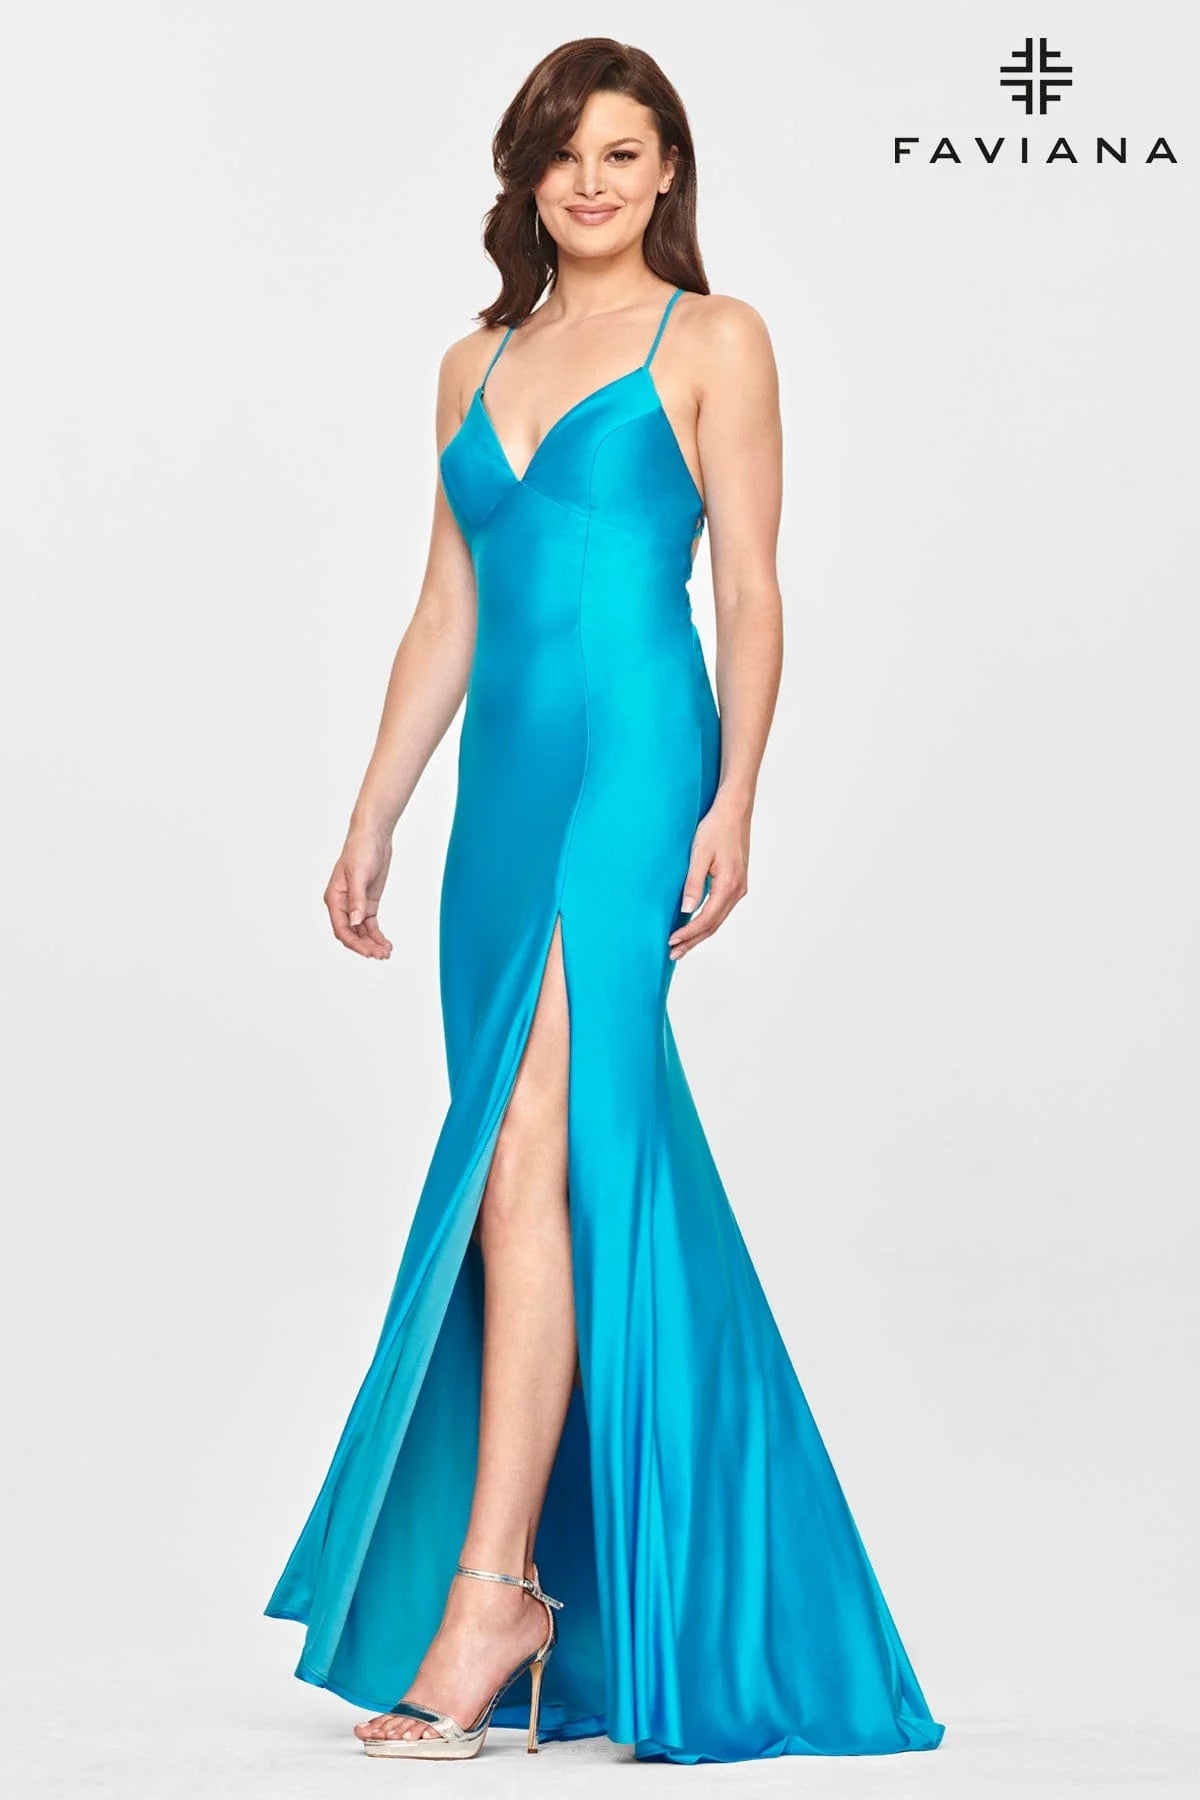 Blue V Neckline Prom Dress With Stretch Fabric And Corset Back